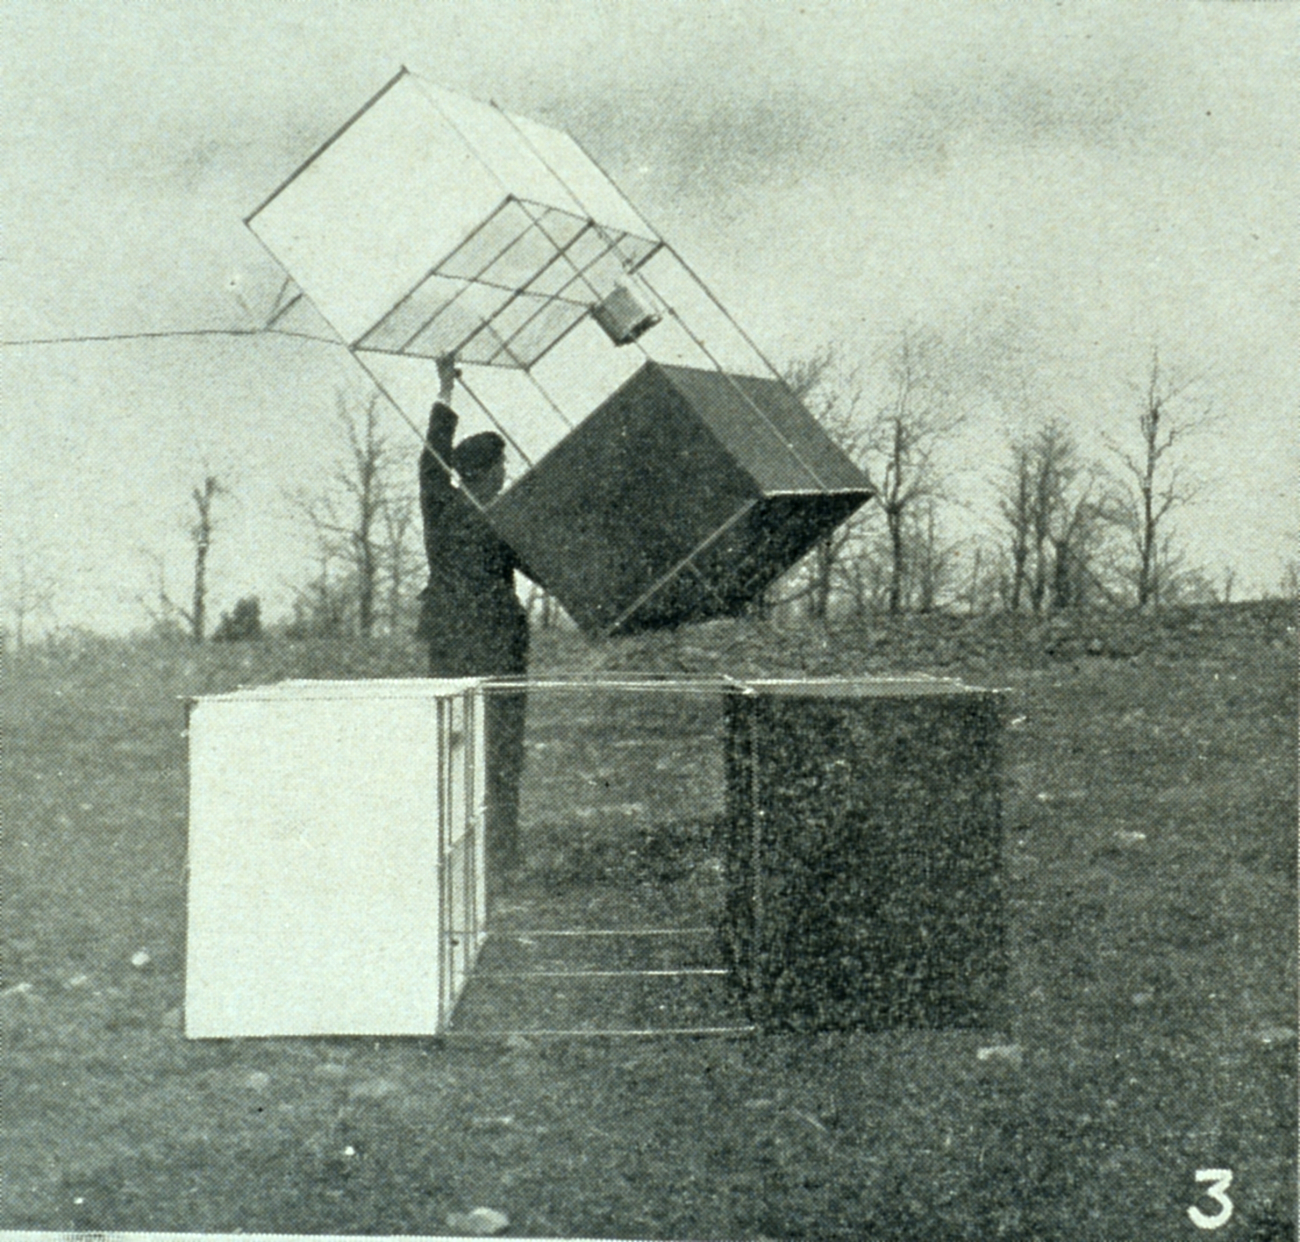 Preparing to launch a meteorological kite